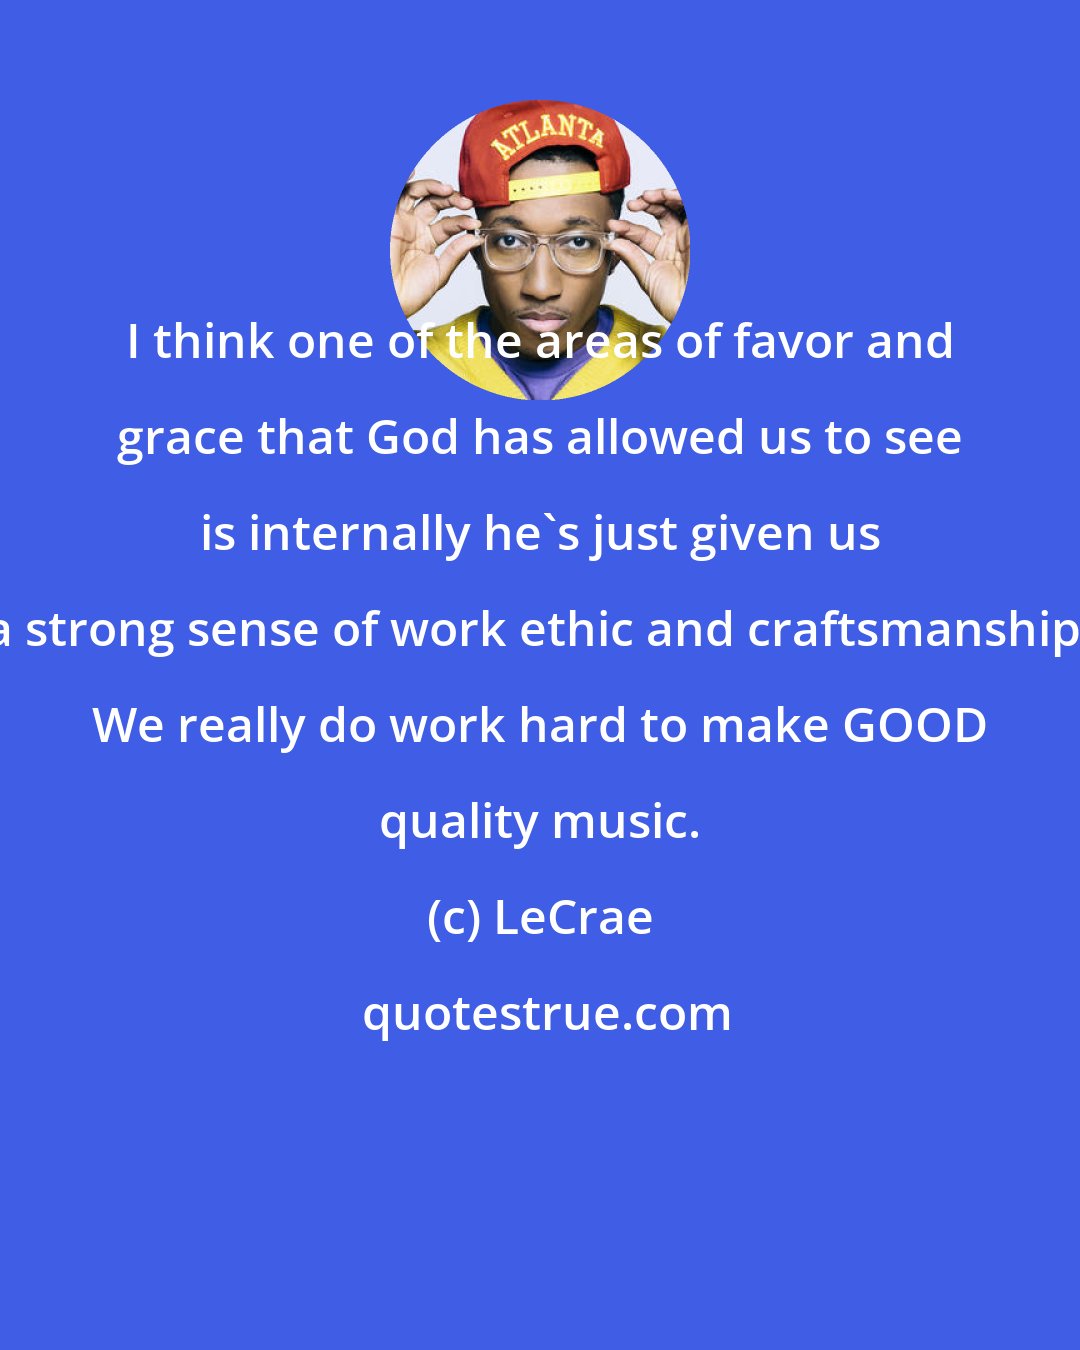 LeCrae: I think one of the areas of favor and grace that God has allowed us to see is internally he's just given us a strong sense of work ethic and craftsmanship. We really do work hard to make GOOD quality music.